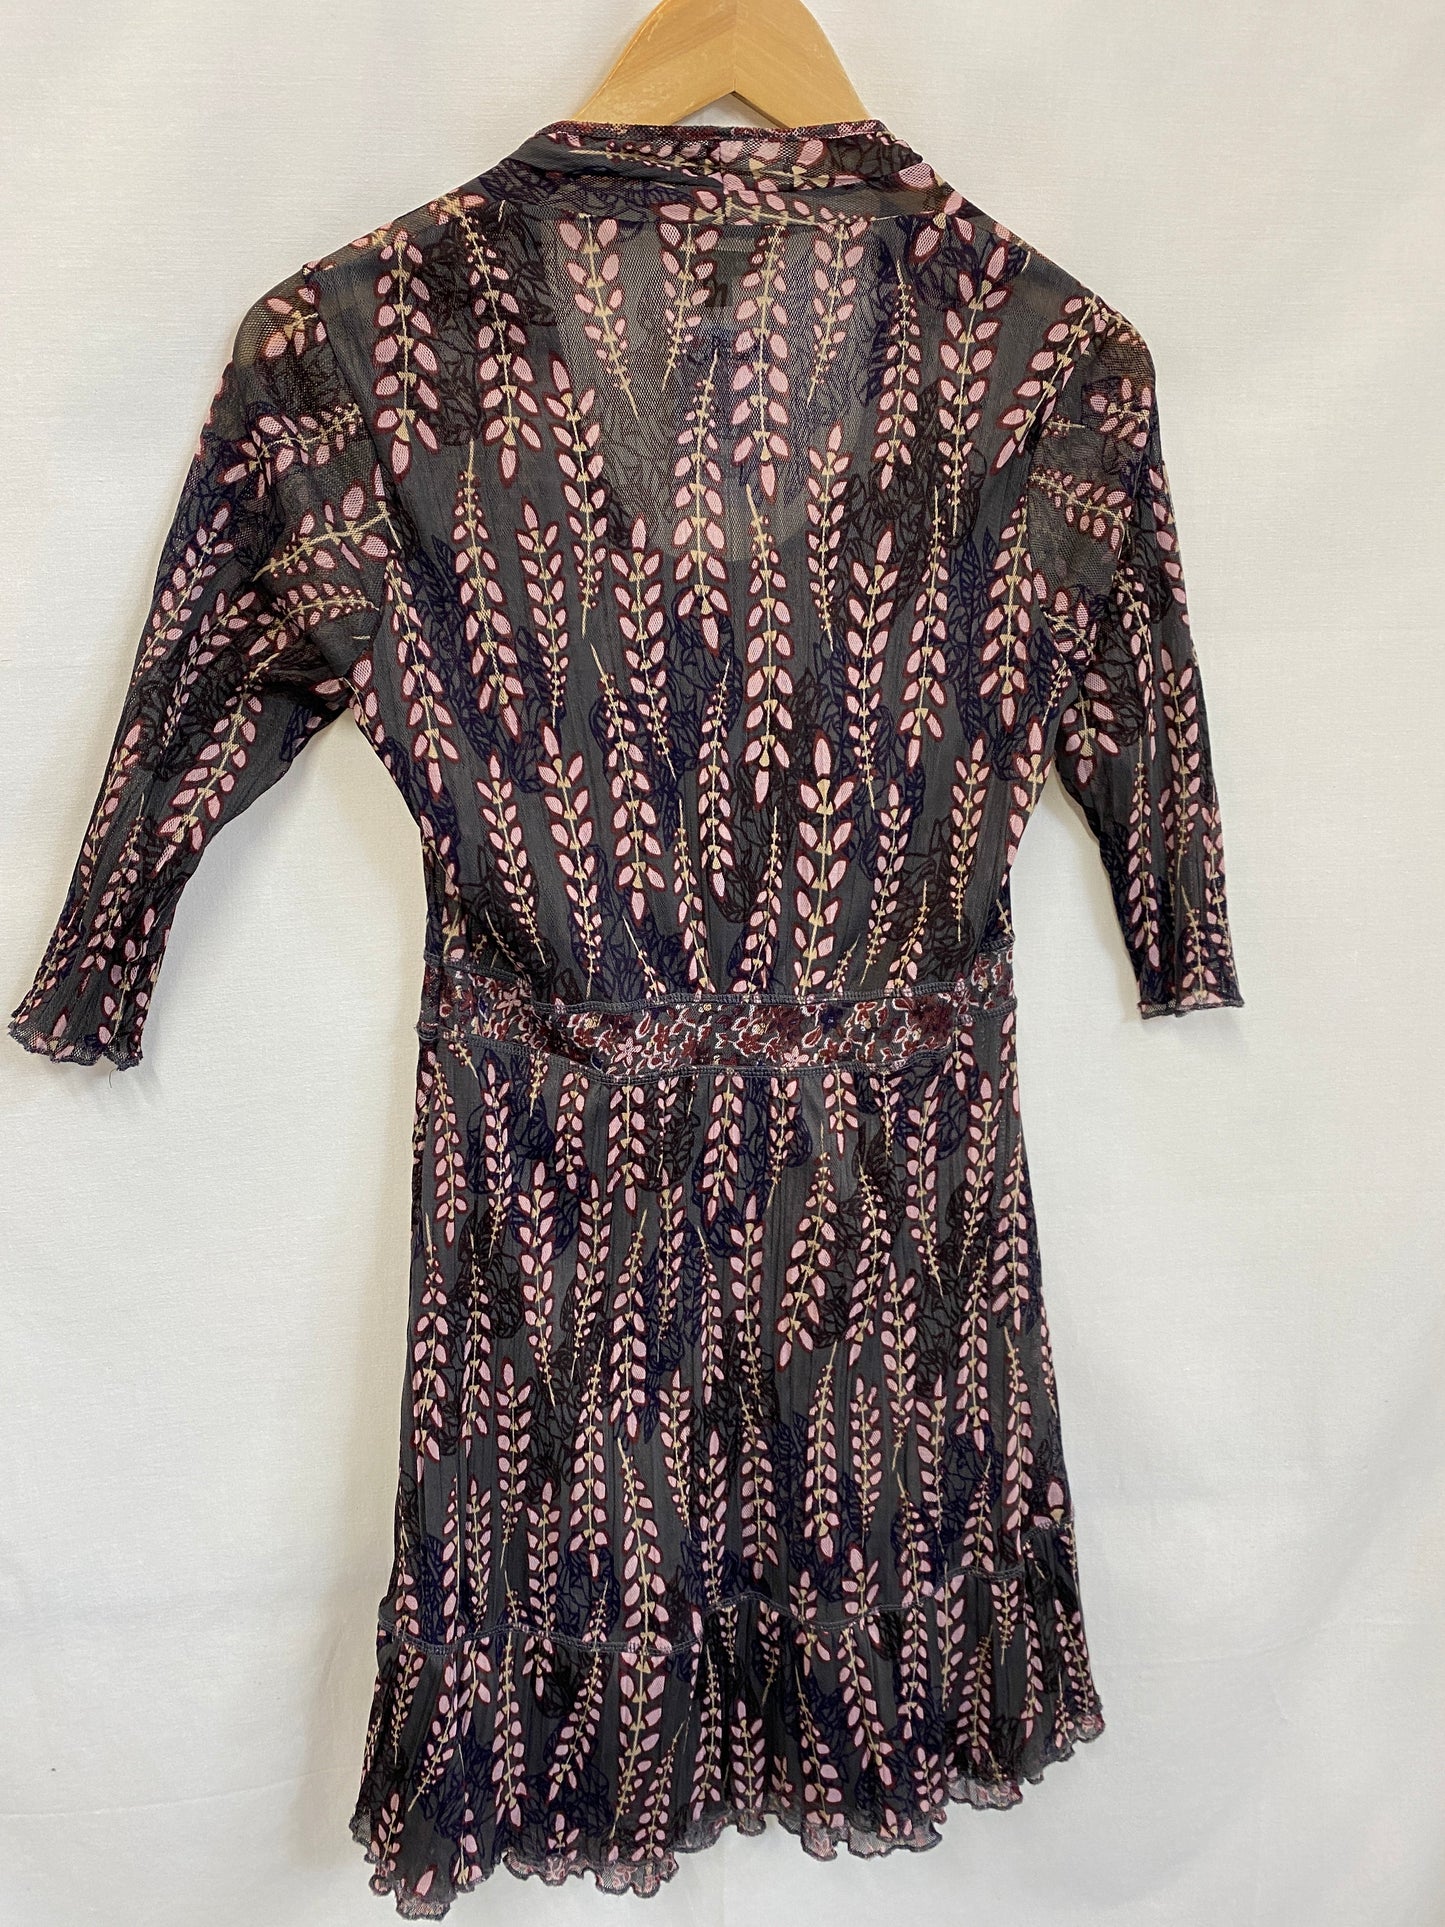 Sheer Mesh Button Front Grey | Pink Floral Dress Size M